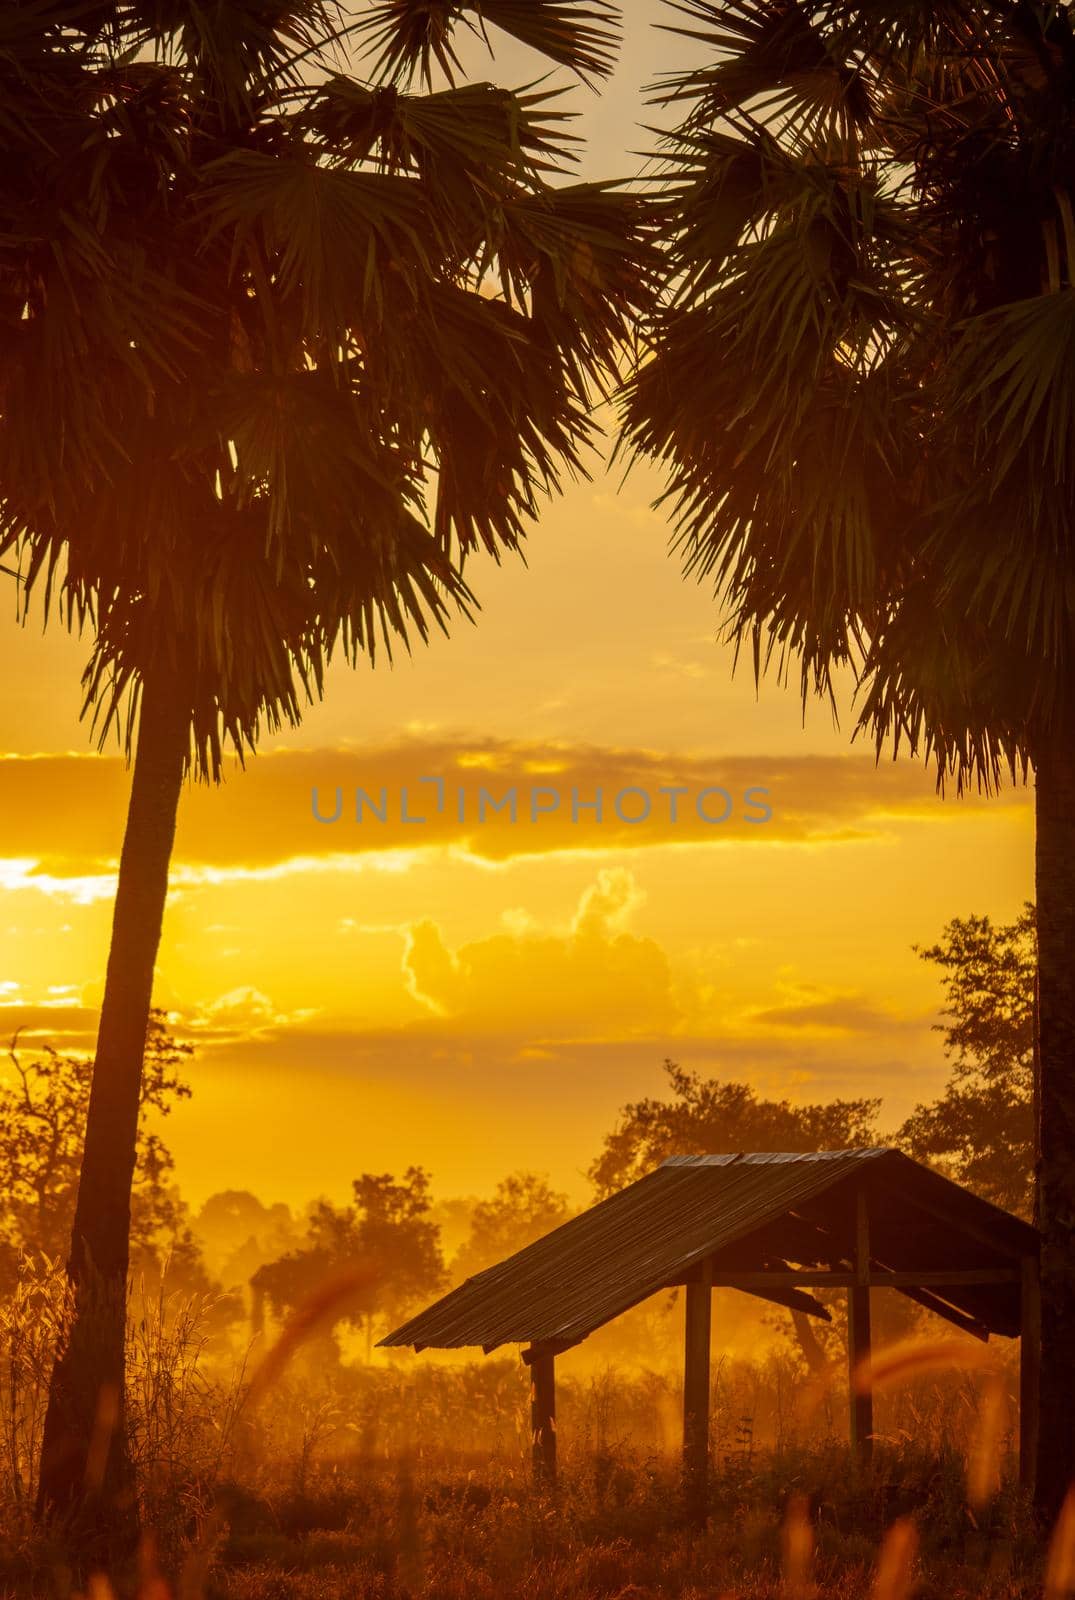 Selective focus on old hut in forest near sugar palm tree in the morning. Golden sunrise sky and silhouette sugar palm tree and hut in rural. Country view. Sunrise shine with yellow and orange color. by Fahroni